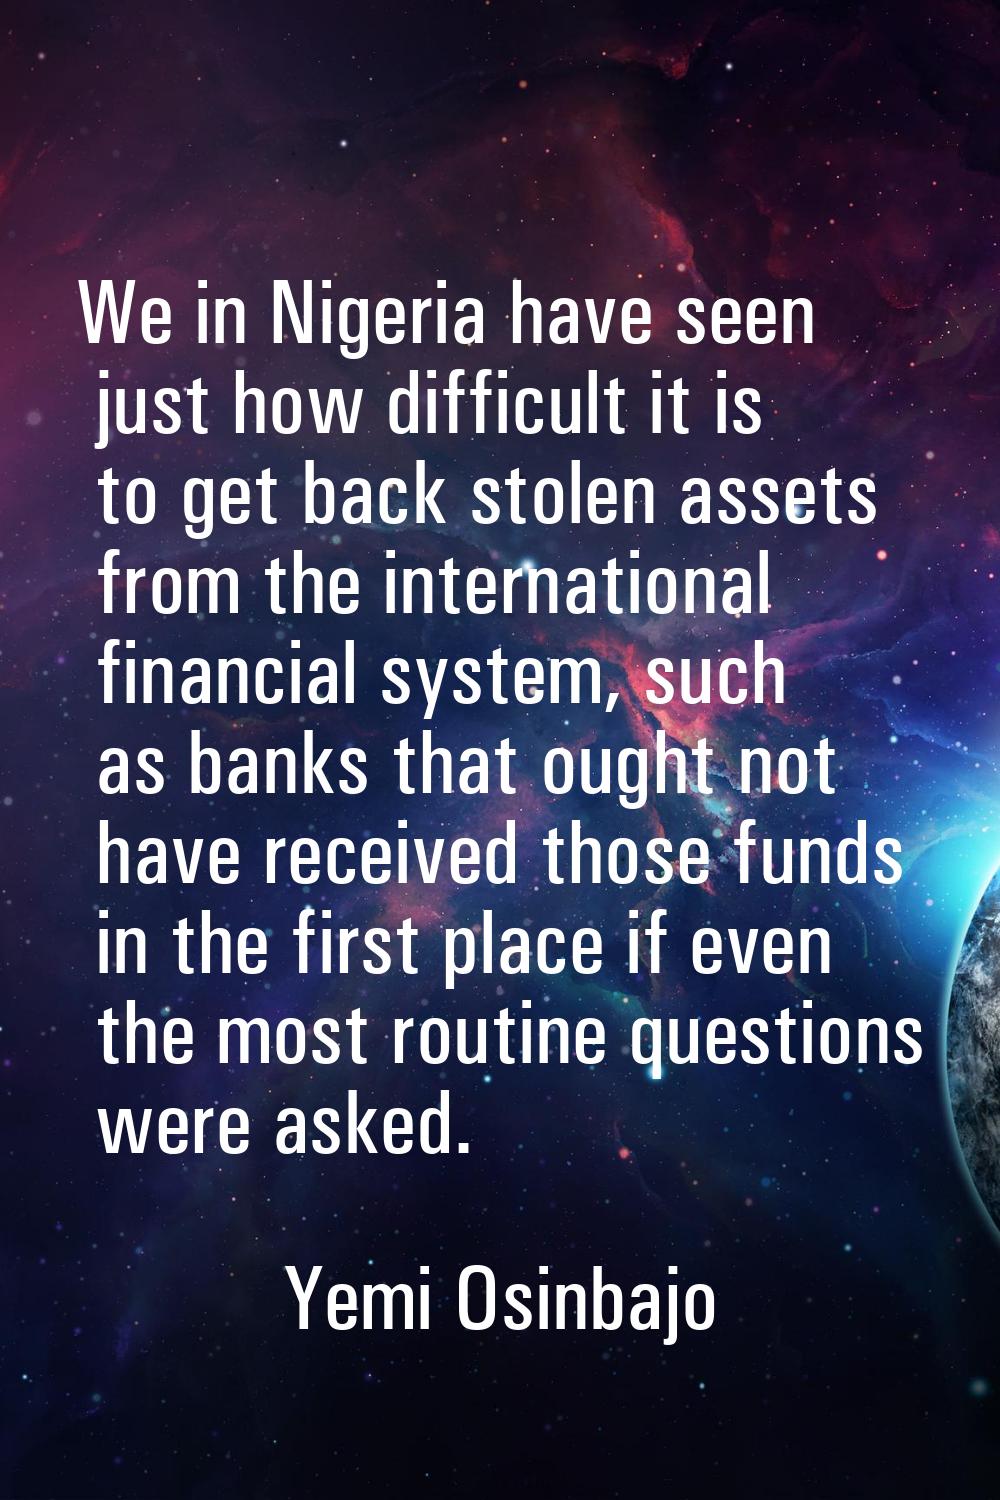 We in Nigeria have seen just how difficult it is to get back stolen assets from the international f